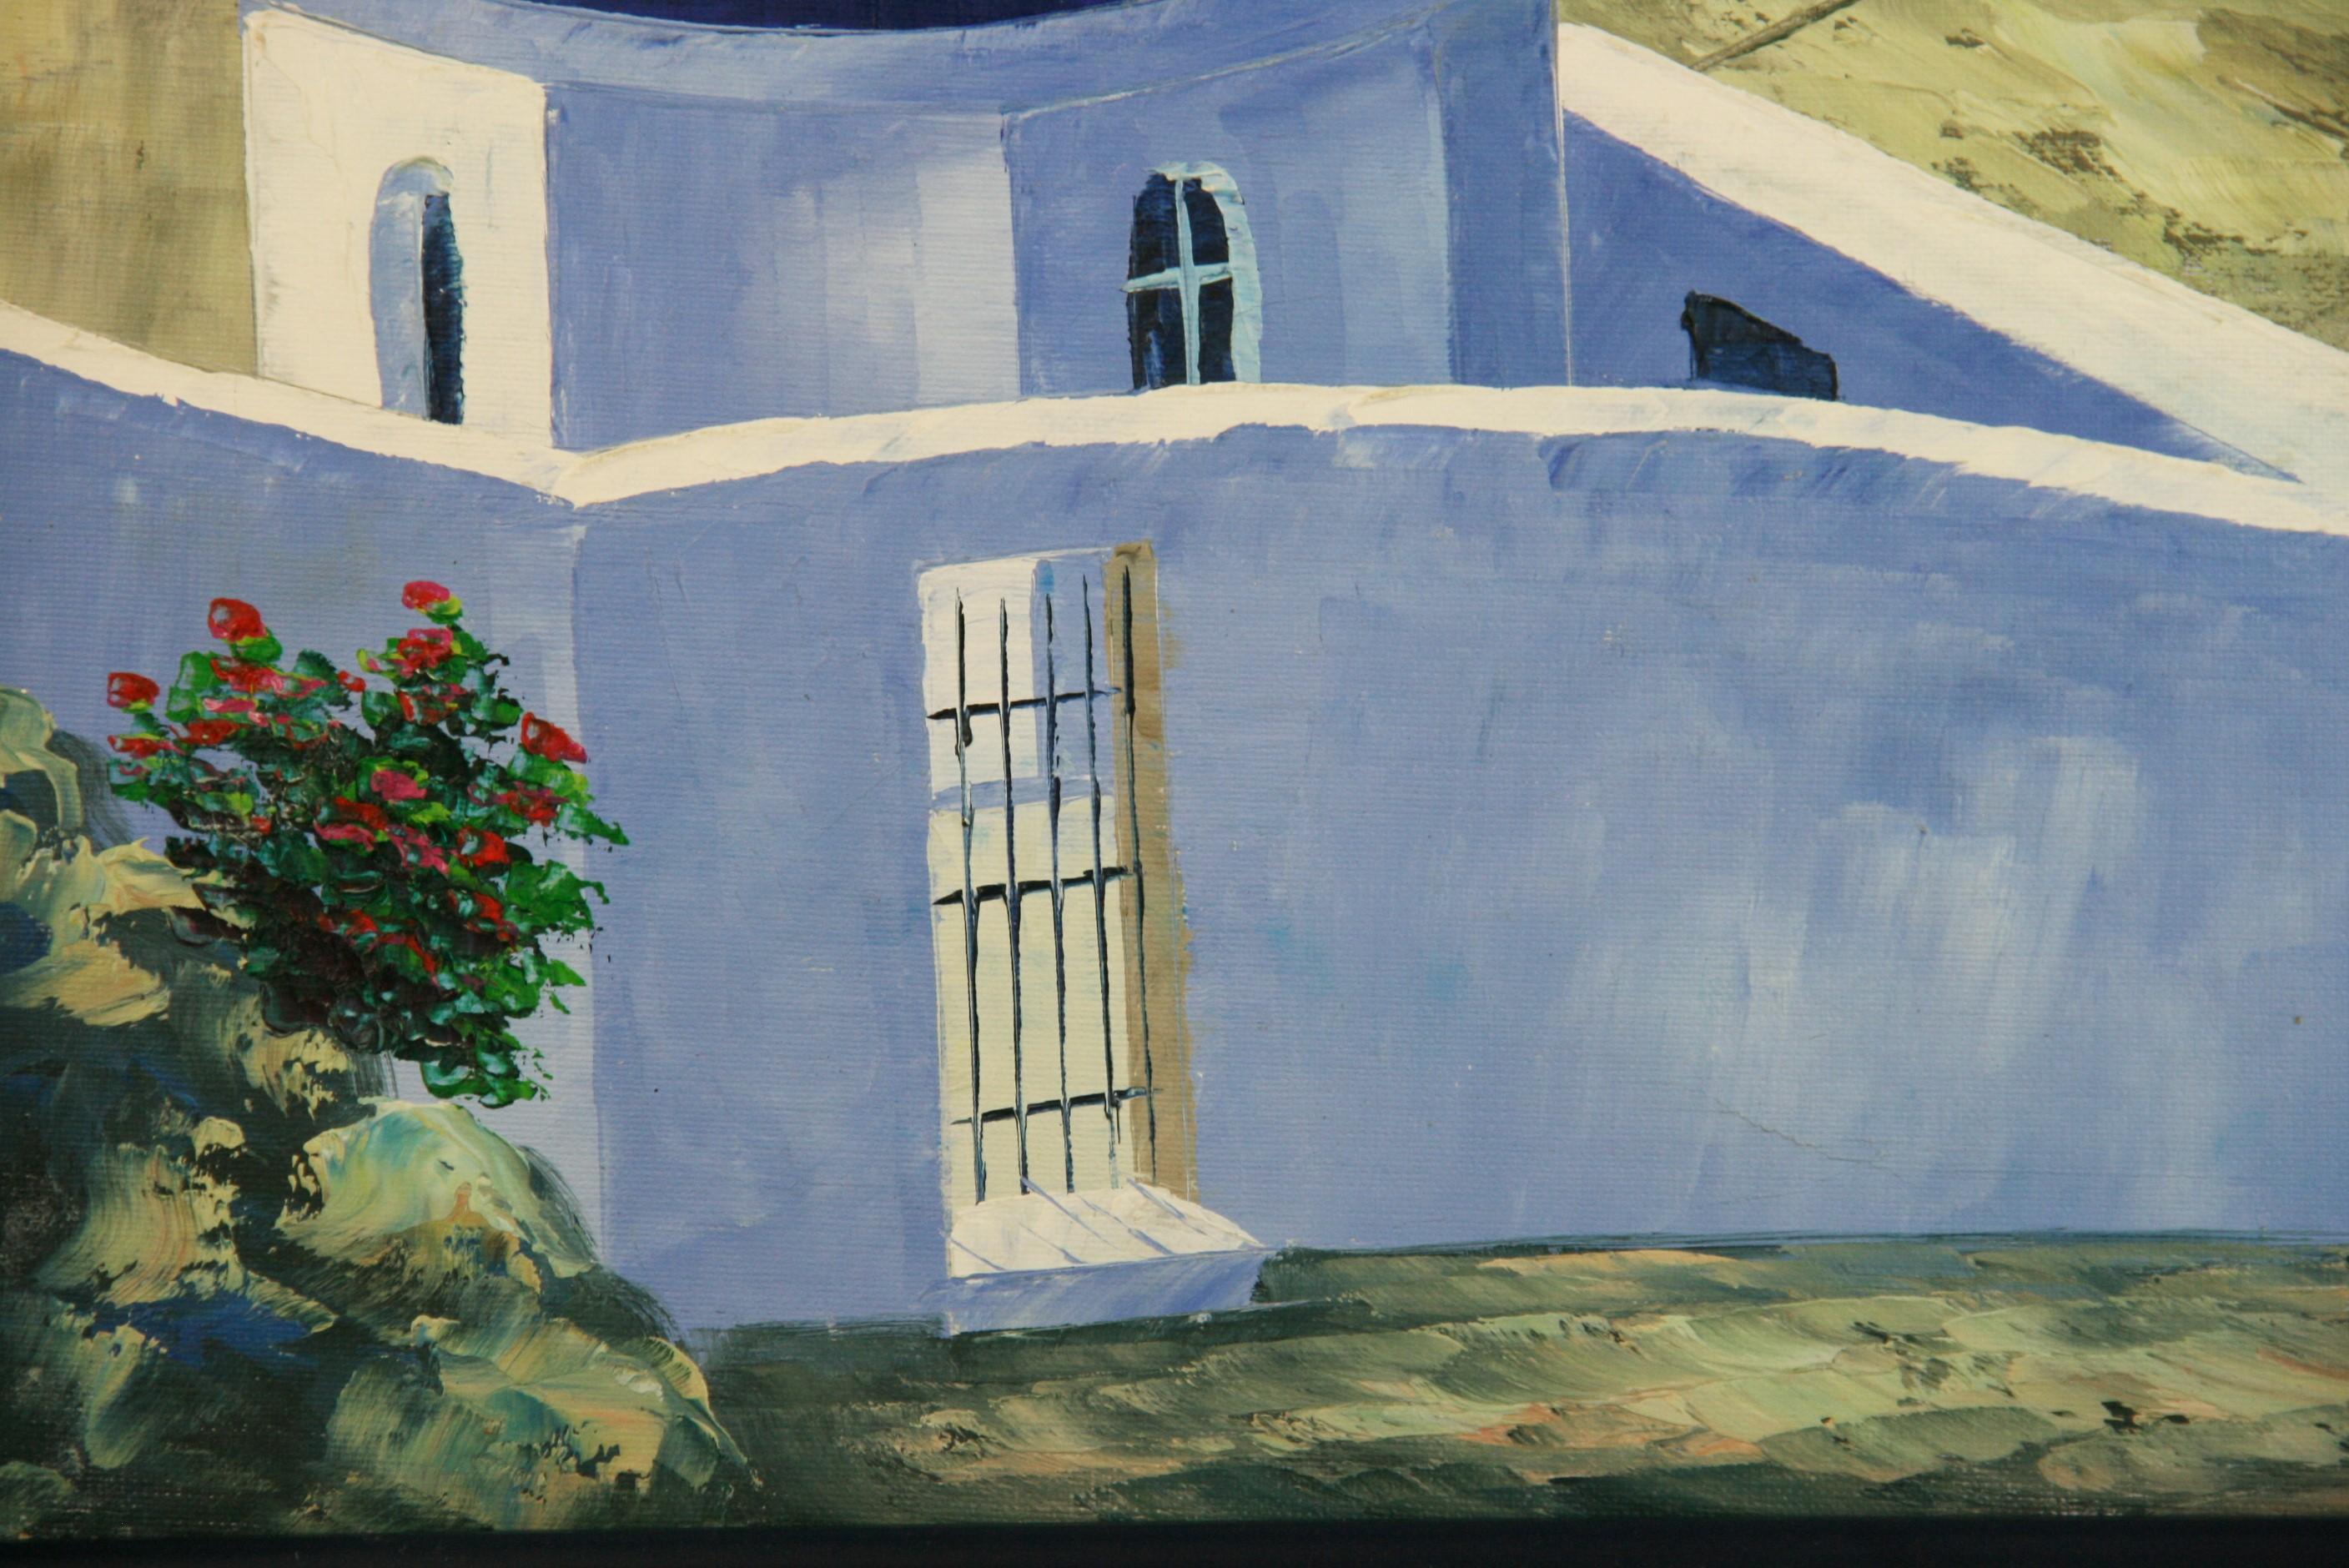 3950 Mykonos Greece sea view landscape oil painting.
Canvas applied to board set in a blue wood frame